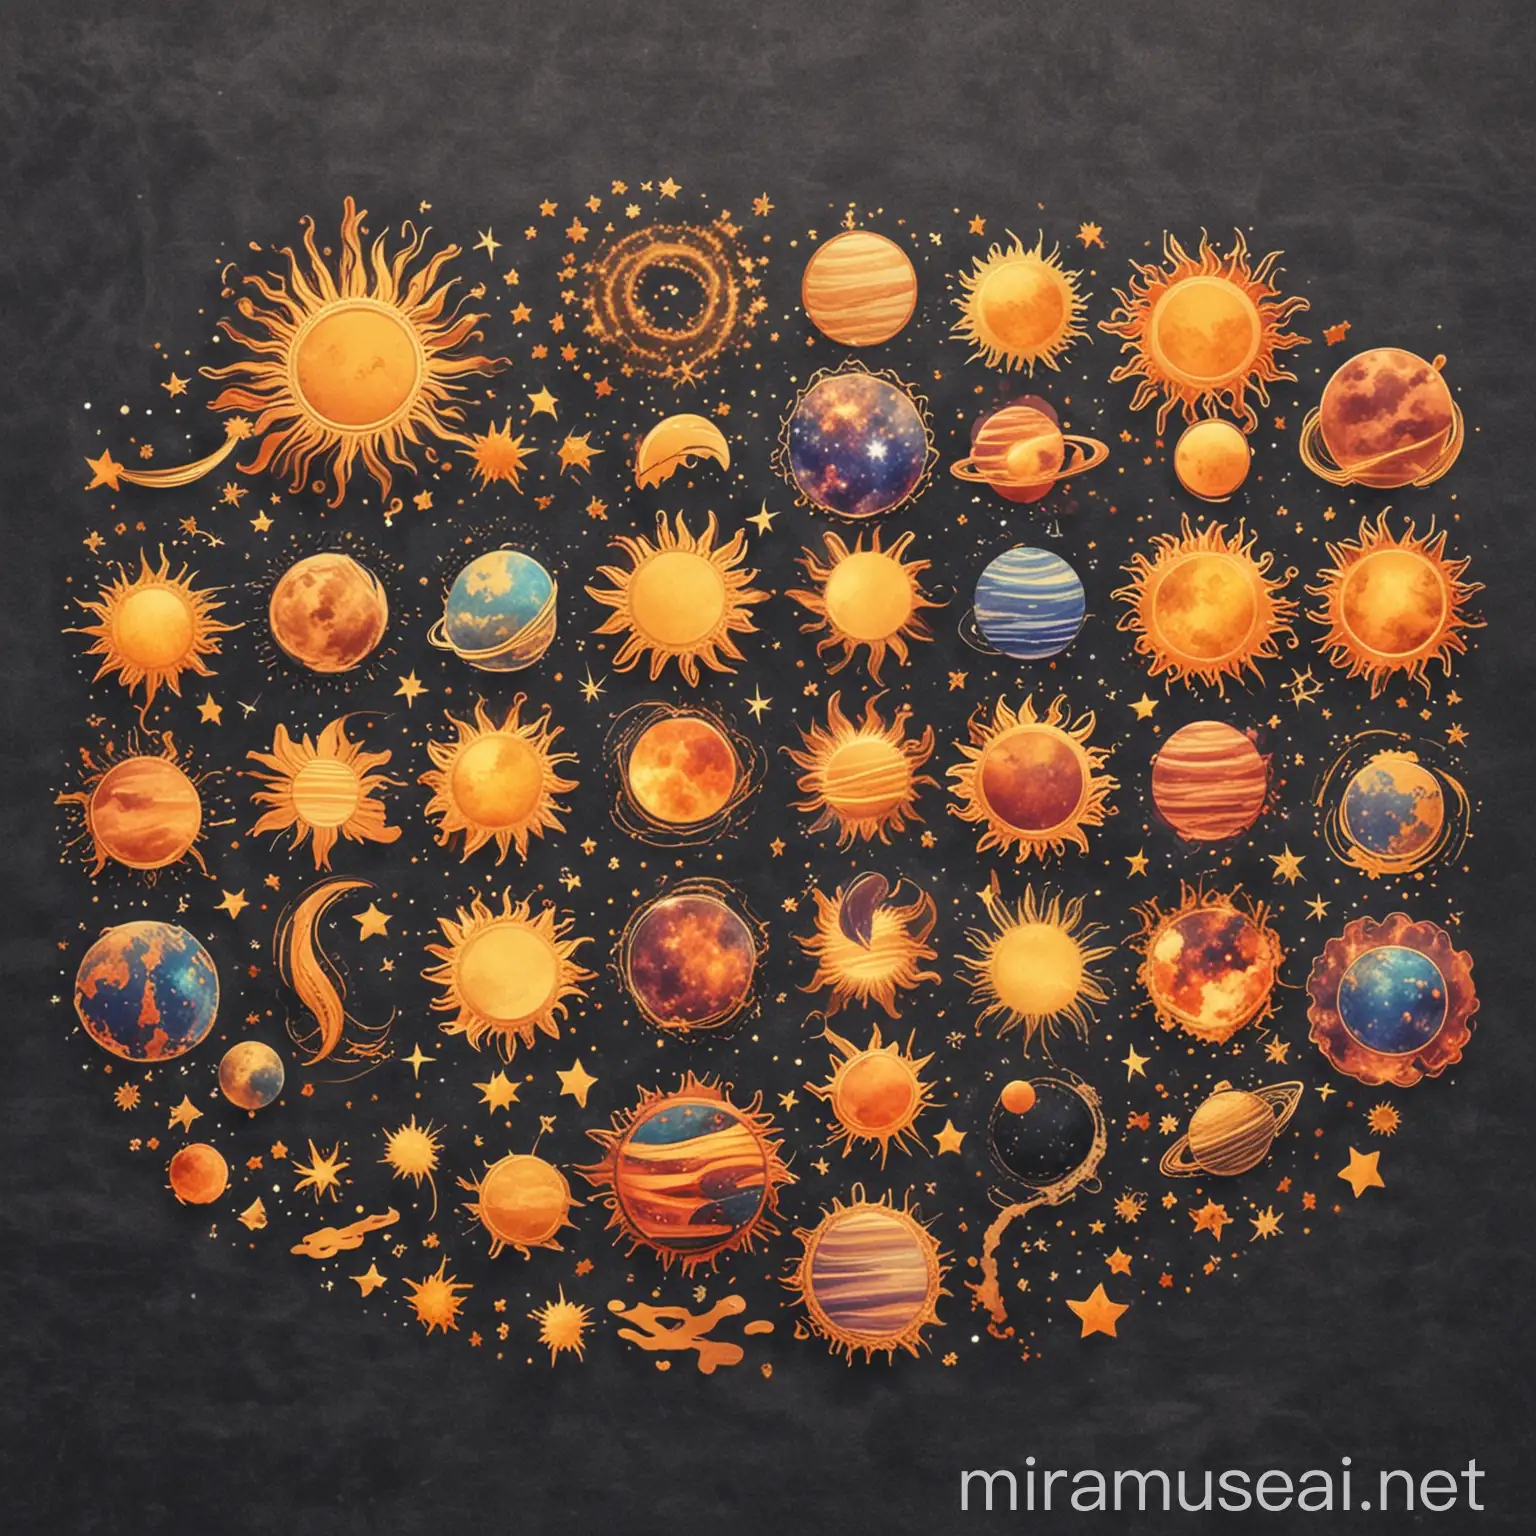 Law of Attraction Sticker Shapes for Journal Sparks Sun Sunrise Planets Joy